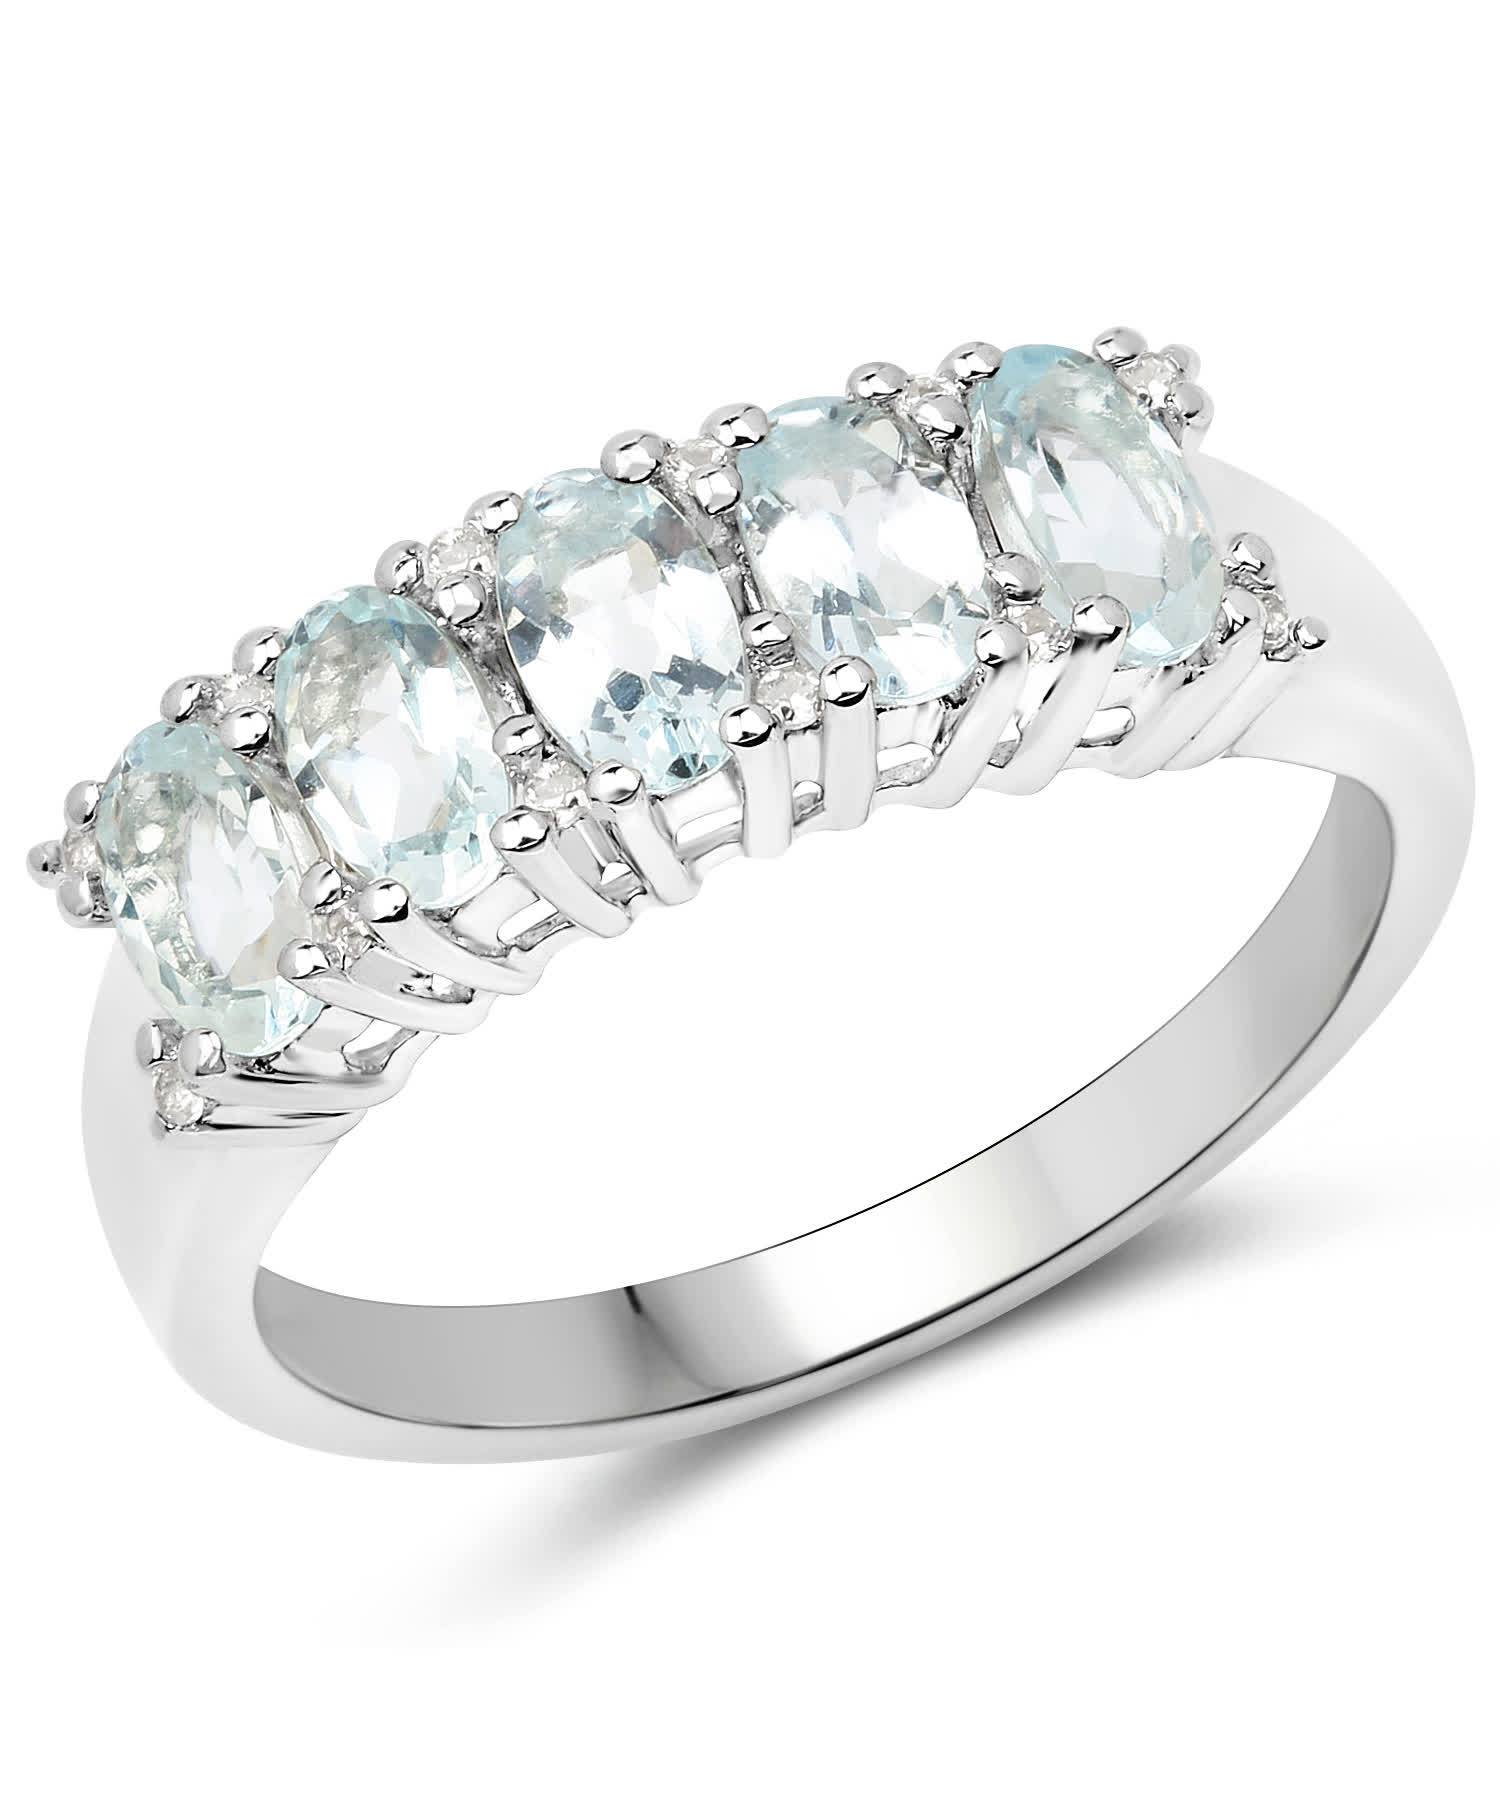 1.06ctw Natural Icy Sky Blue Aquamarine and Zircon Rhodium Plated 925 Sterling Silver Ring View 1